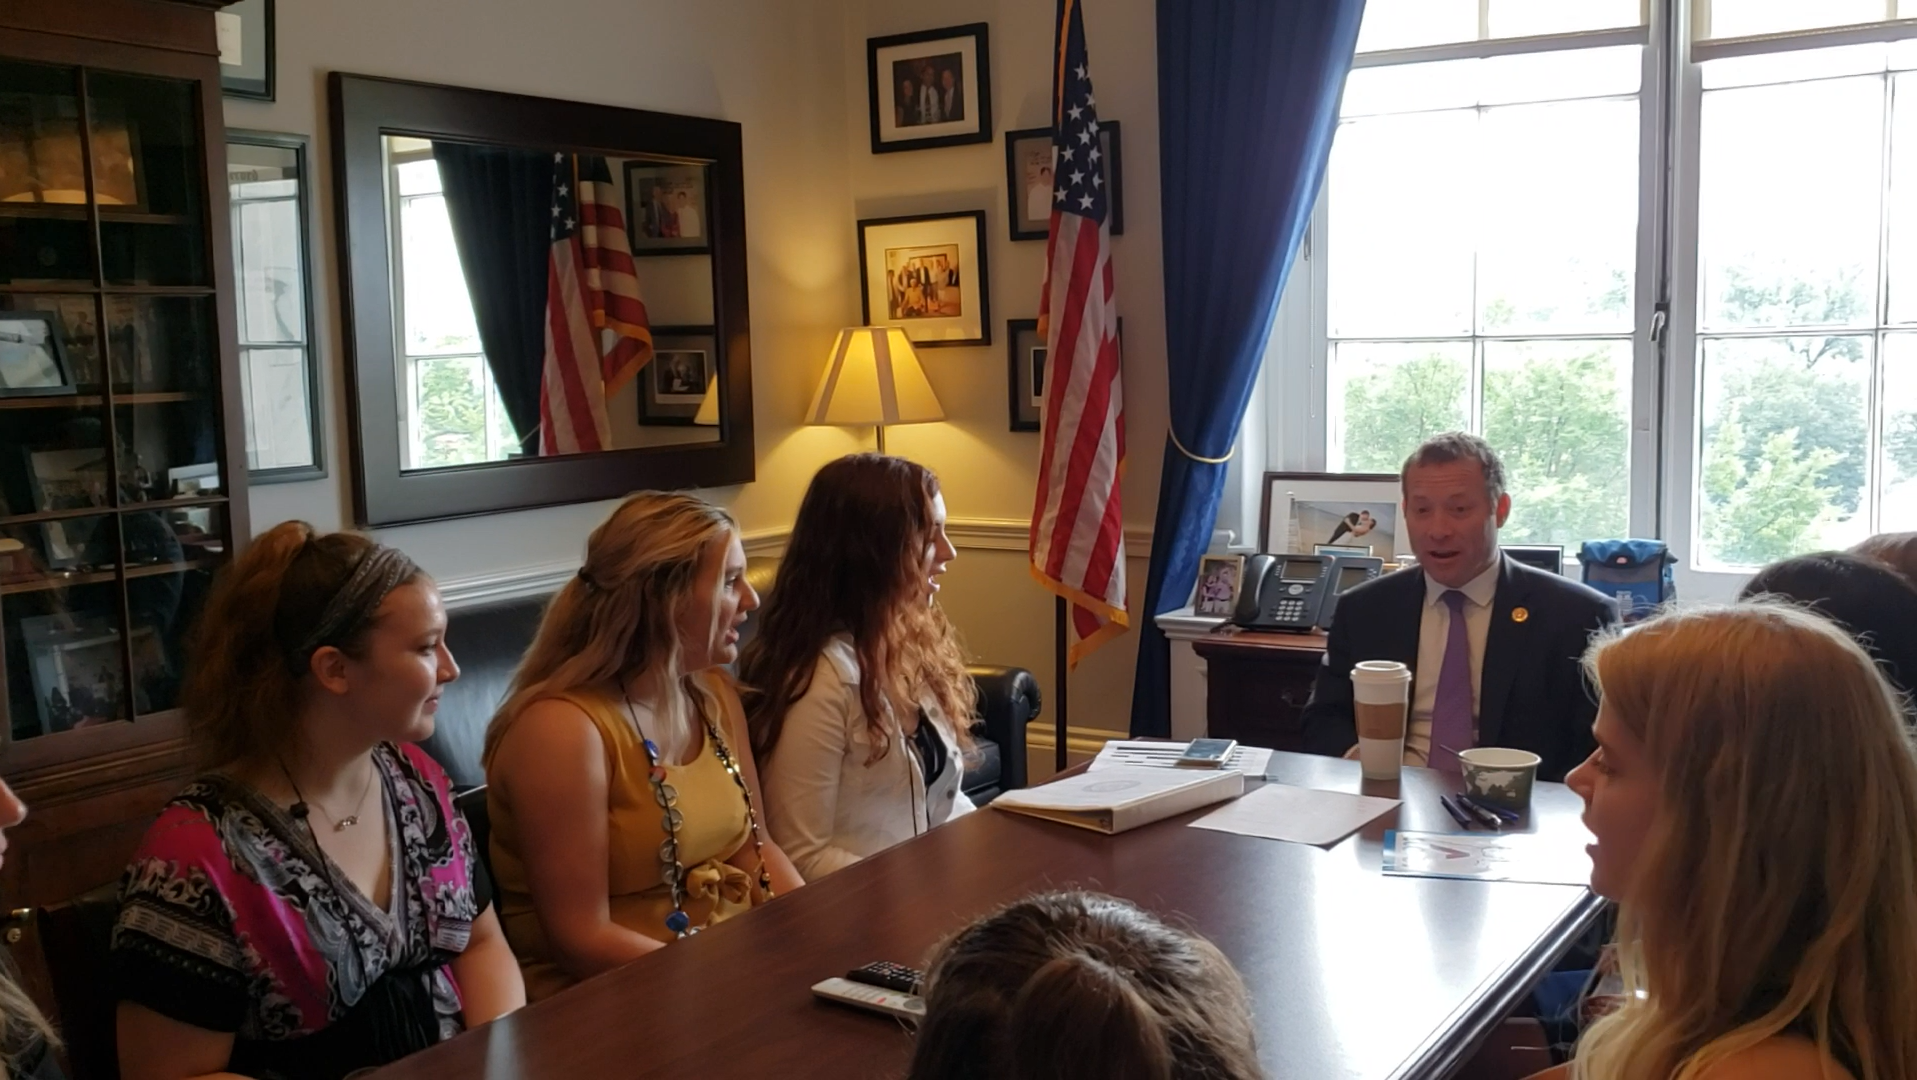 Pictured: Youth Tour students from New Jersey on the 2019 trip meet with NJ Congressman Josh Gottheimer in his Washington, D.C. office.